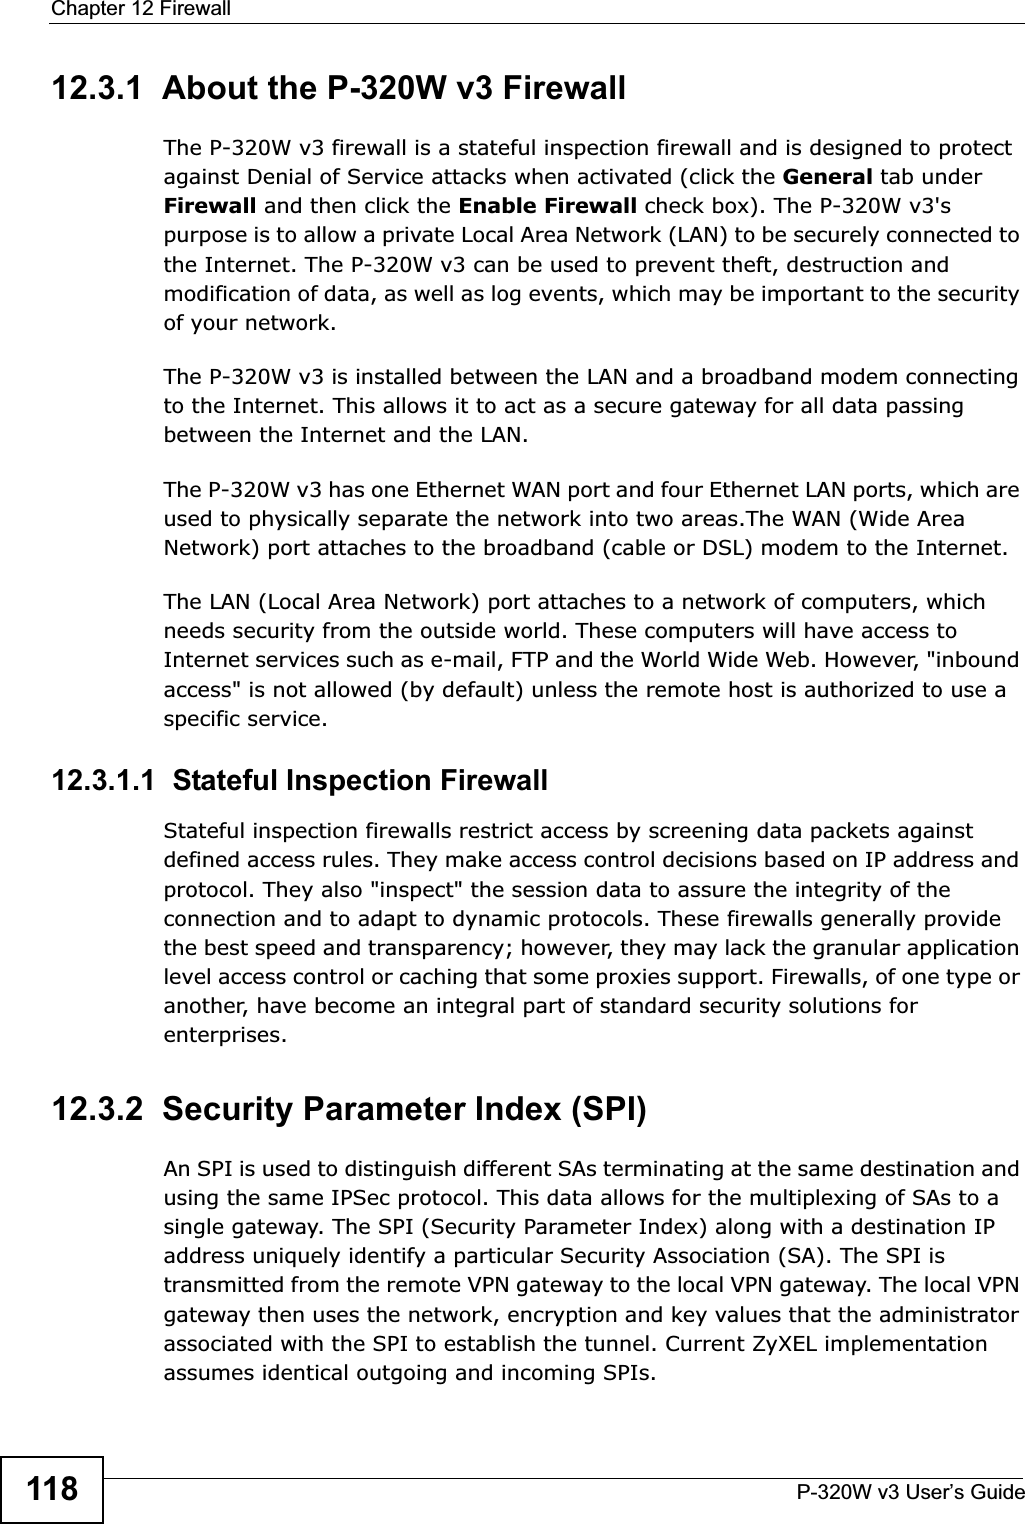 Chapter 12 FirewallP-320W v3 User’s Guide11812.3.1  About the P-320W v3 FirewallThe P-320W v3 firewall is a stateful inspection firewall and is designed to protect against Denial of Service attacks when activated (click the General tab underFirewall and then click the Enable Firewall check box). The P-320W v3&apos;s purpose is to allow a private Local Area Network (LAN) to be securely connected to the Internet. The P-320W v3 can be used to prevent theft, destruction and modification of data, as well as log events, which may be important to the security of your network. The P-320W v3 is installed between the LAN and a broadband modem connecting to the Internet. This allows it to act as a secure gateway for all data passing between the Internet and the LAN.The P-320W v3 has one Ethernet WAN port and four Ethernet LAN ports, which are used to physically separate the network into two areas.The WAN (Wide Area Network) port attaches to the broadband (cable or DSL) modem to the Internet.The LAN (Local Area Network) port attaches to a network of computers, which needs security from the outside world. These computers will have access to Internet services such as e-mail, FTP and the World Wide Web. However, &quot;inbound access&quot; is not allowed (by default) unless the remote host is authorized to use a specific service.12.3.1.1  Stateful Inspection Firewall Stateful inspection firewalls restrict access by screening data packets against defined access rules. They make access control decisions based on IP address and protocol. They also &quot;inspect&quot; the session data to assure the integrity of the connection and to adapt to dynamic protocols. These firewalls generally provide the best speed and transparency; however, they may lack the granular application level access control or caching that some proxies support. Firewalls, of one type or another, have become an integral part of standard security solutions for enterprises.12.3.2  Security Parameter Index (SPI)An SPI is used to distinguish different SAs terminating at the same destination and using the same IPSec protocol. This data allows for the multiplexing of SAs to a single gateway. The SPI (Security Parameter Index) along with a destination IP address uniquely identify a particular Security Association (SA). The SPI is transmitted from the remote VPN gateway to the local VPN gateway. The local VPN gateway then uses the network, encryption and key values that the administrator associated with the SPI to establish the tunnel. Current ZyXEL implementation assumes identical outgoing and incoming SPIs.